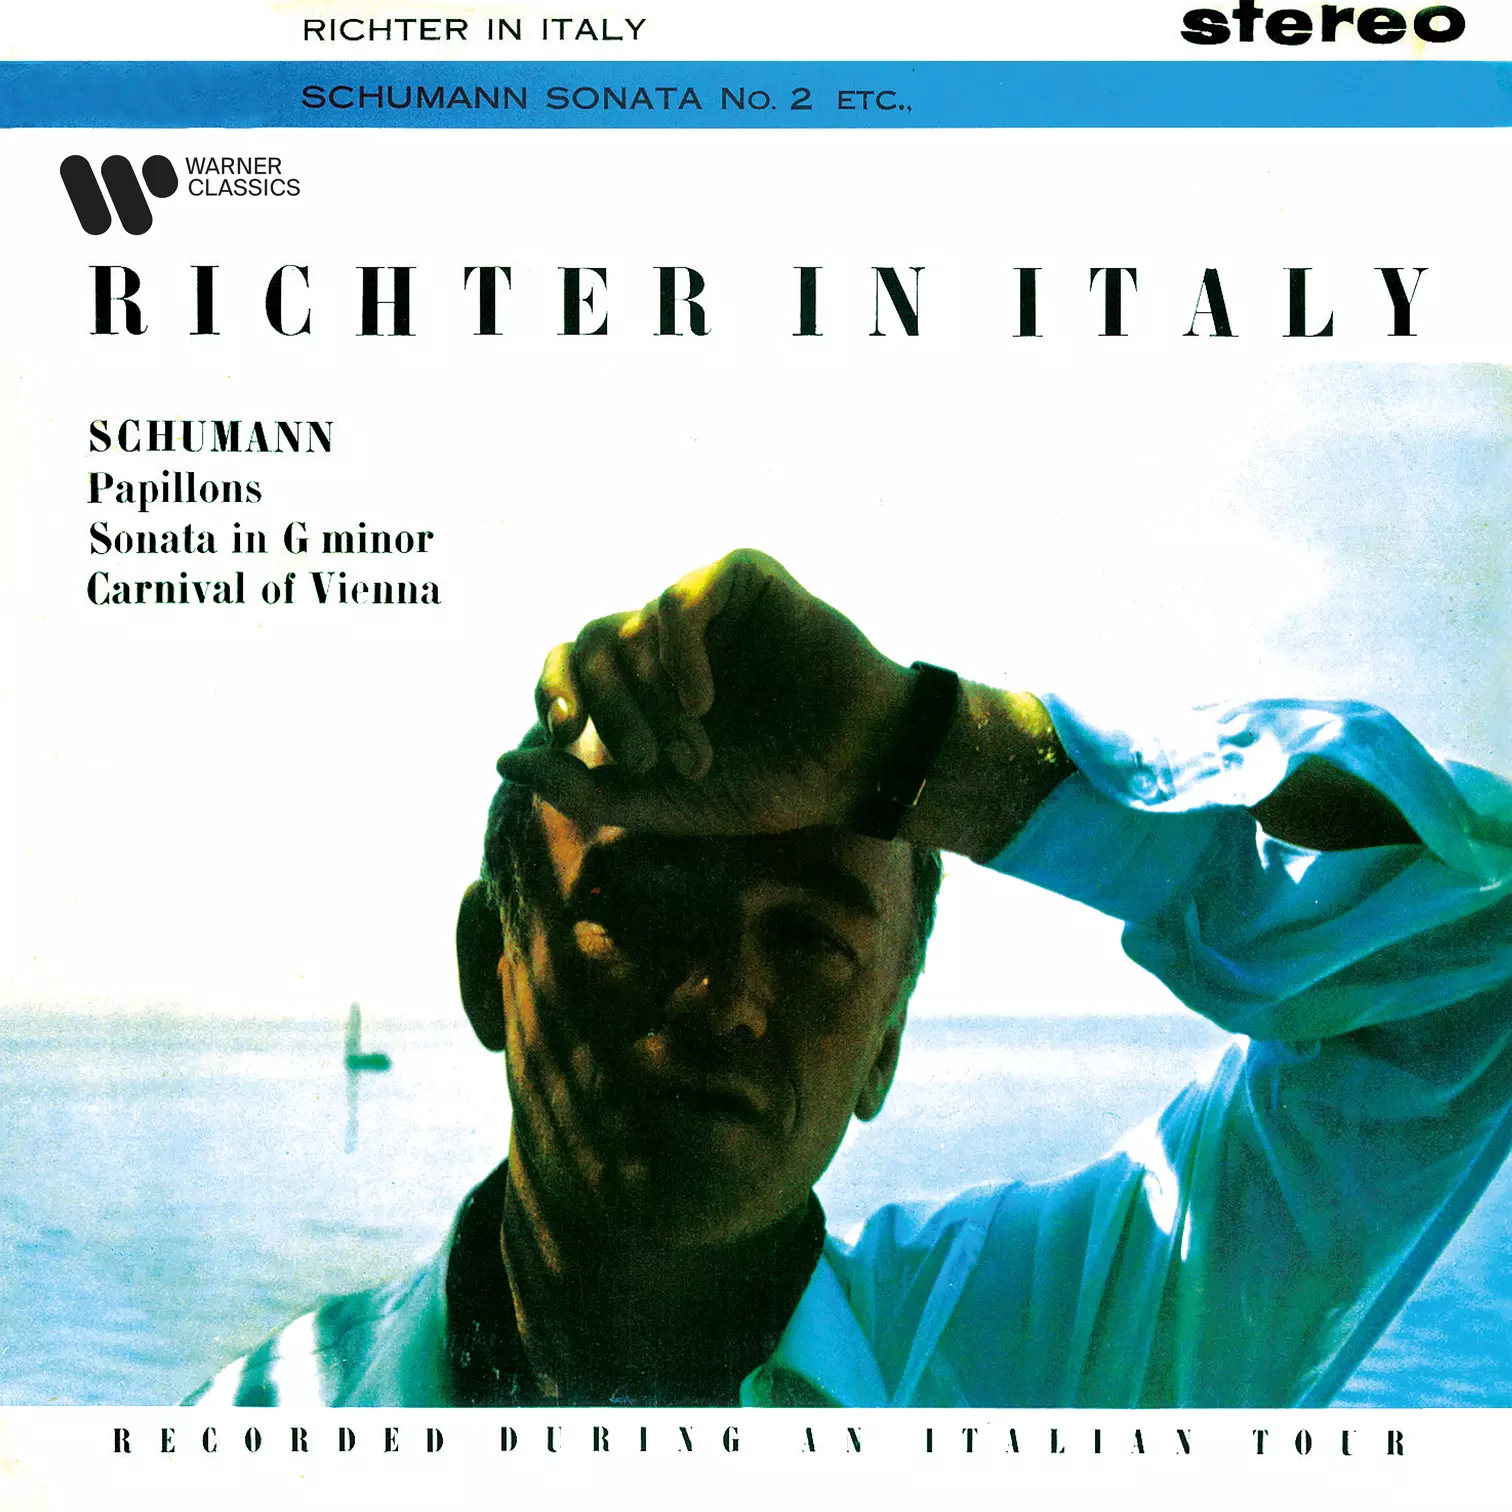 Richter in Italy. Schumann: Papillons, Piano Sonata No. 2 & Carnival of Vienna